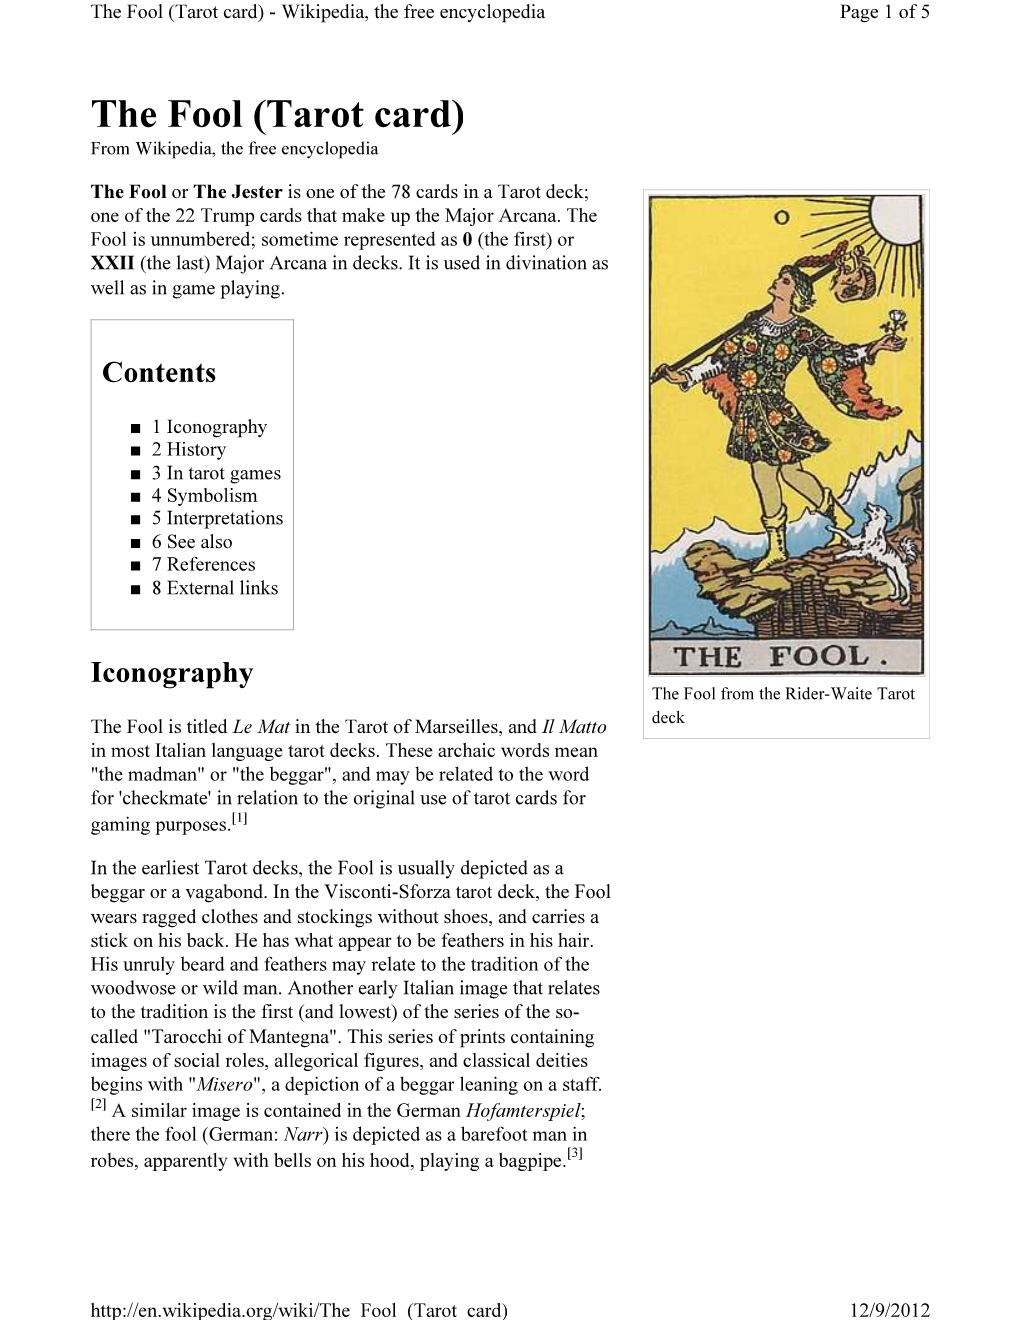 The Fool (Tarot Card) - Wikipedia, the Free Encyclopedia Page 1 of 5